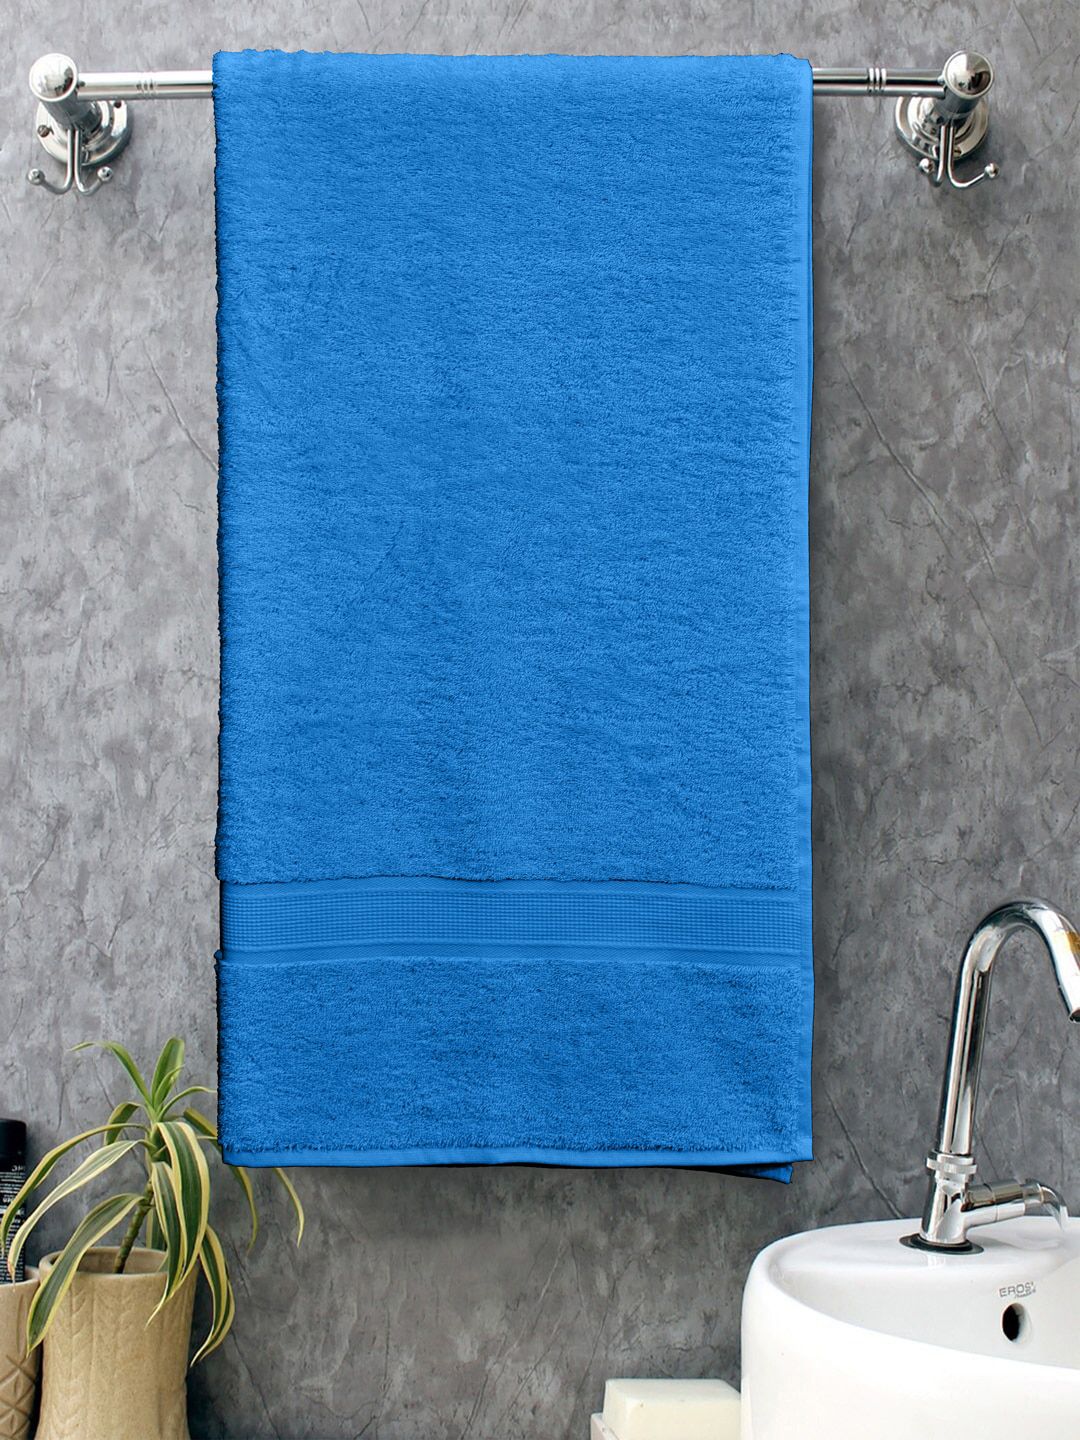 BOMBAY DYEING Turquoise Blue Solid 550 GSM Pure Cotton Bath Towel Price in India